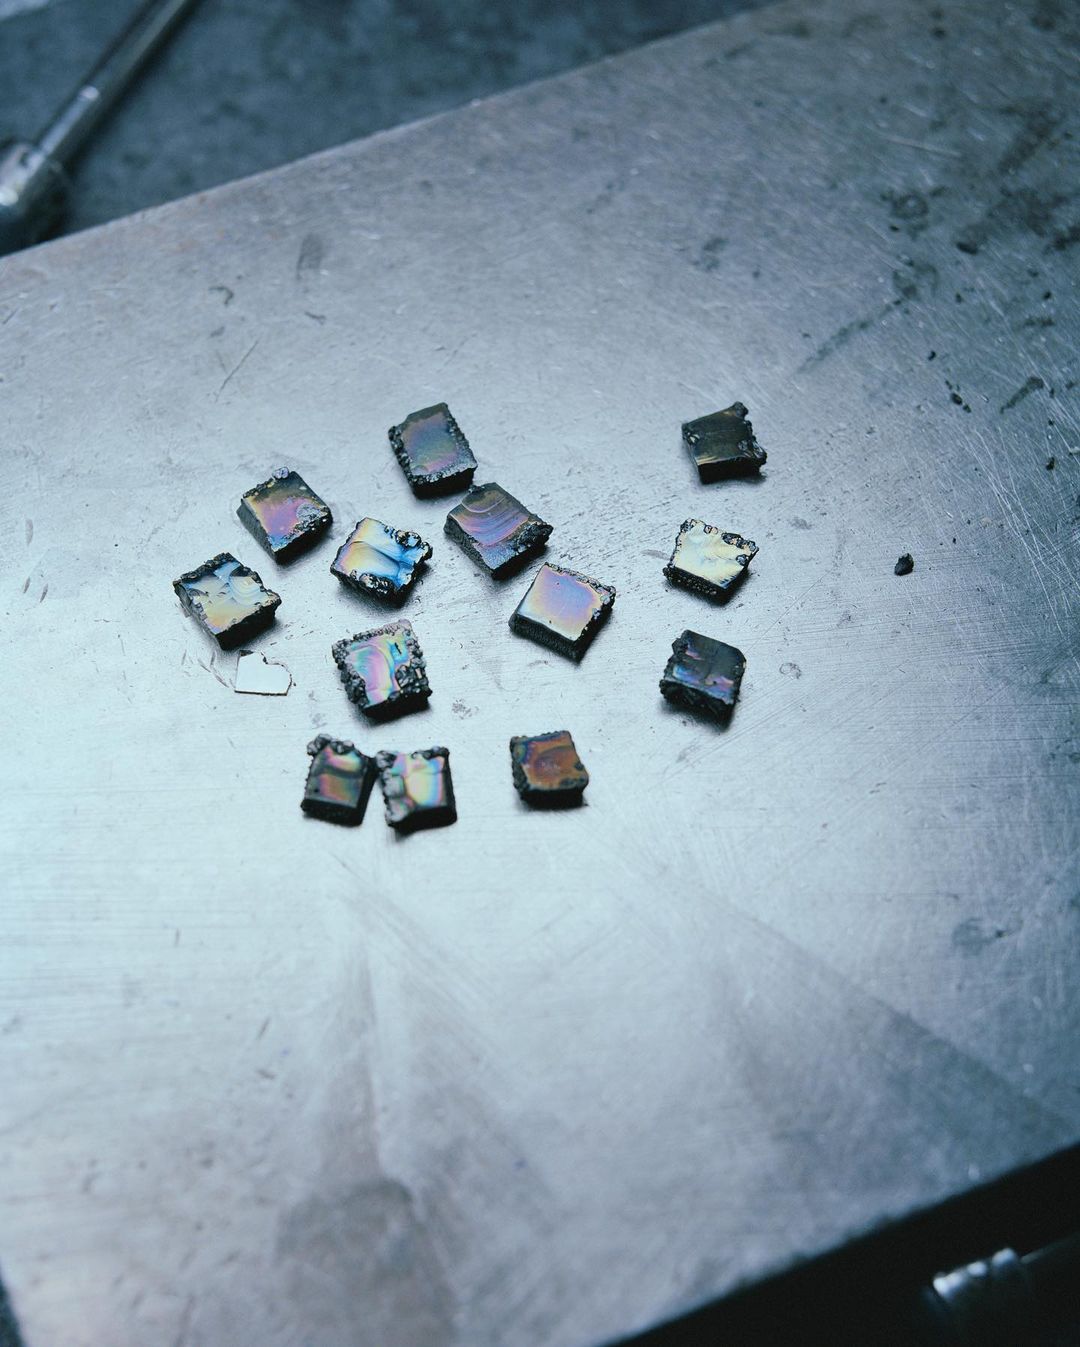 A peek at the raw materials used in the lab-grown diamond making process